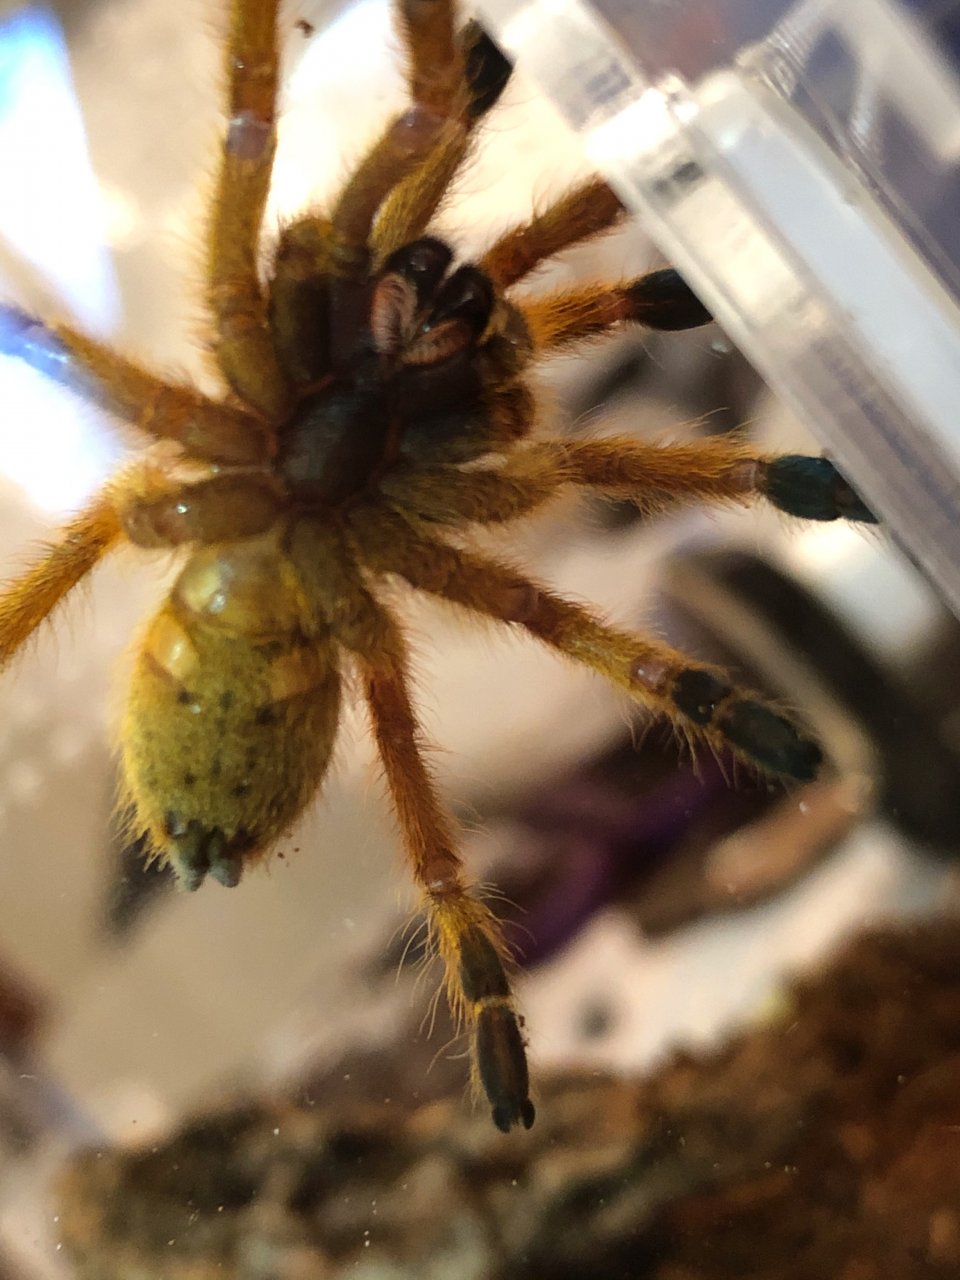 OBT M or F?